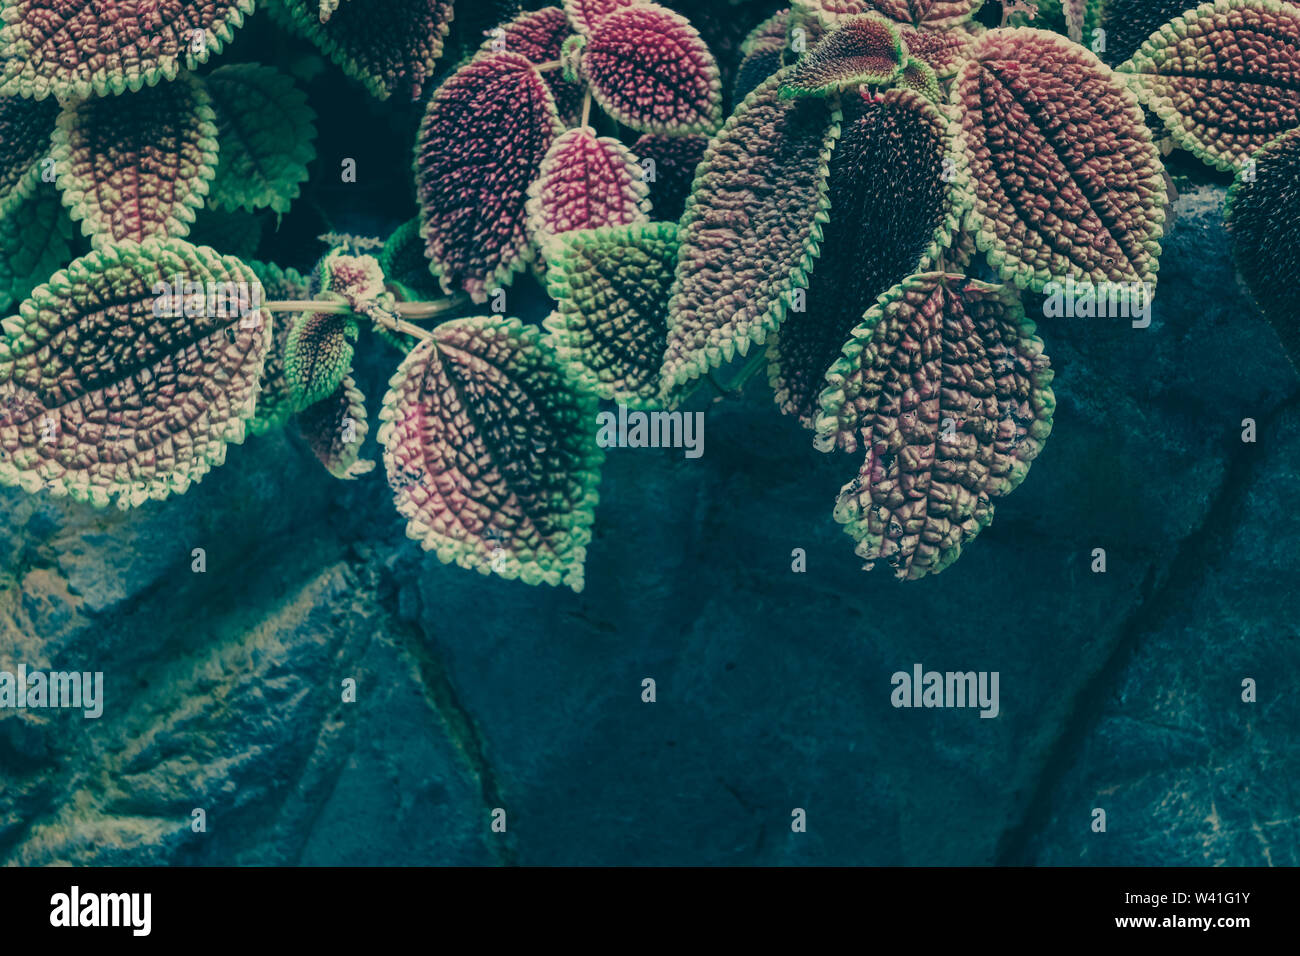 Leaves of Pilea mollis. Green Leaf. Nature background Stock Photo